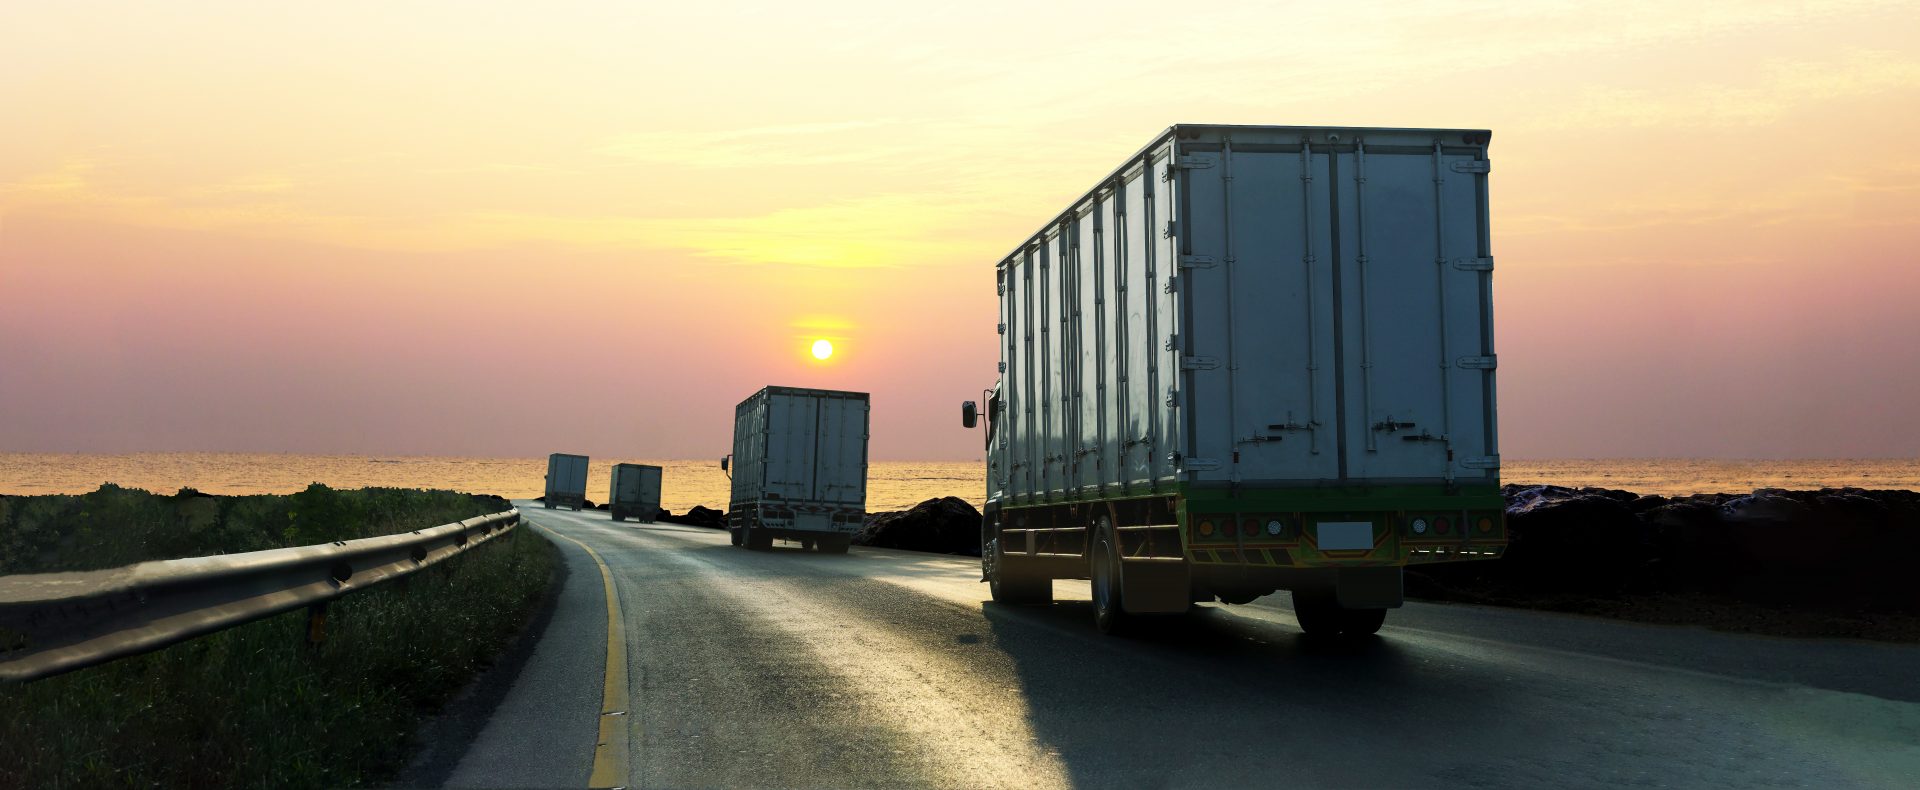 One of the finest Road Logistics Services Provider in Pakistan